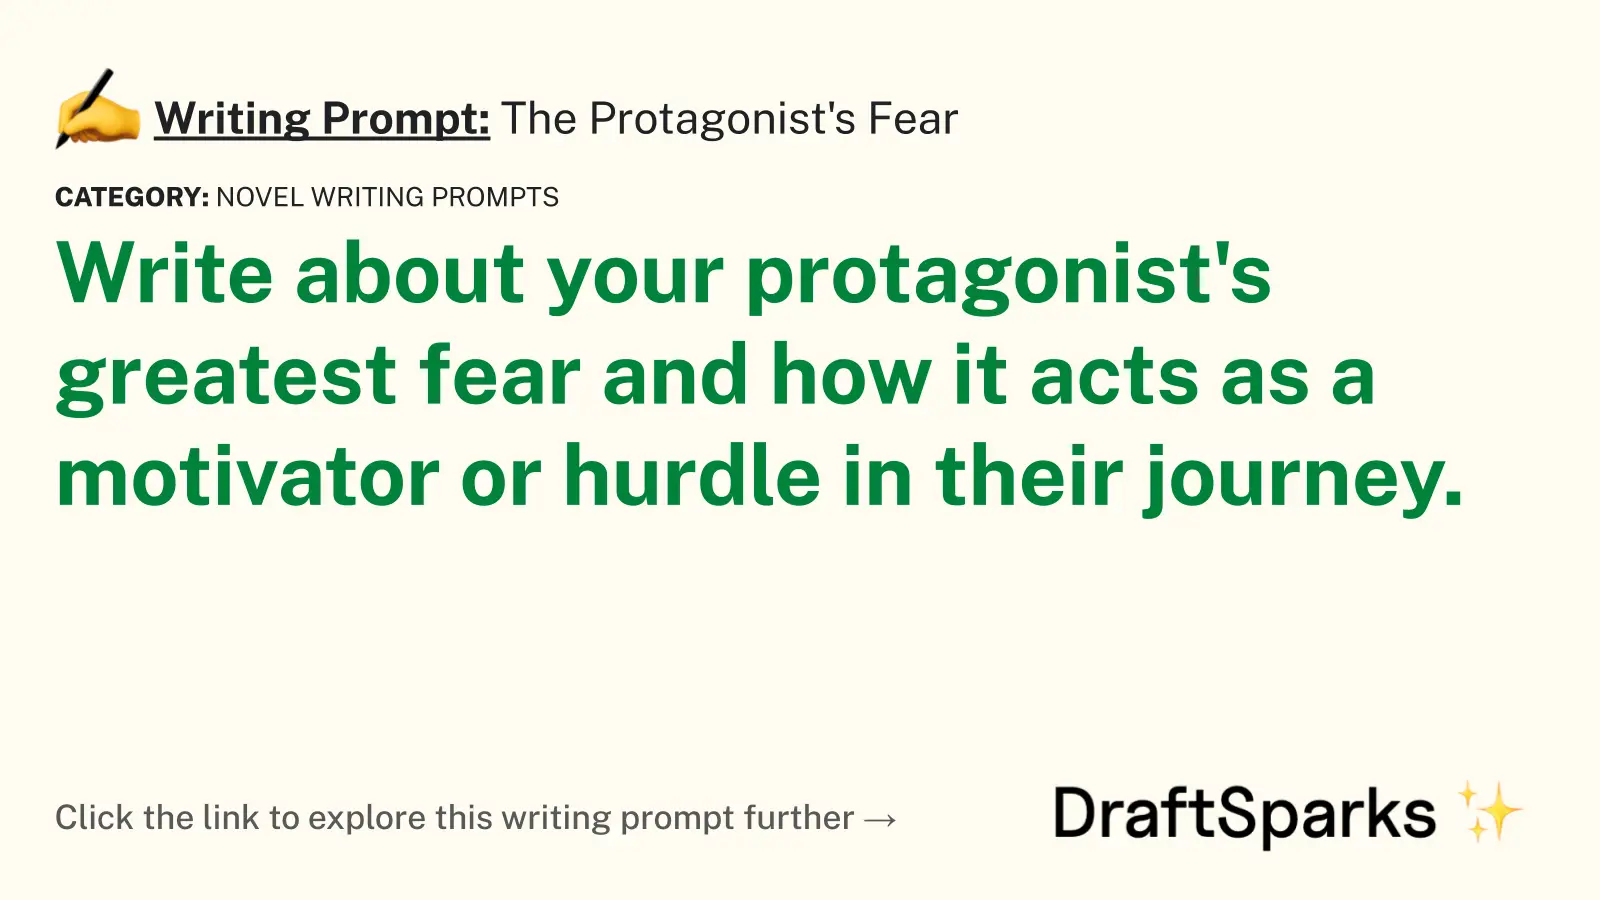 The Protagonist’s Fear